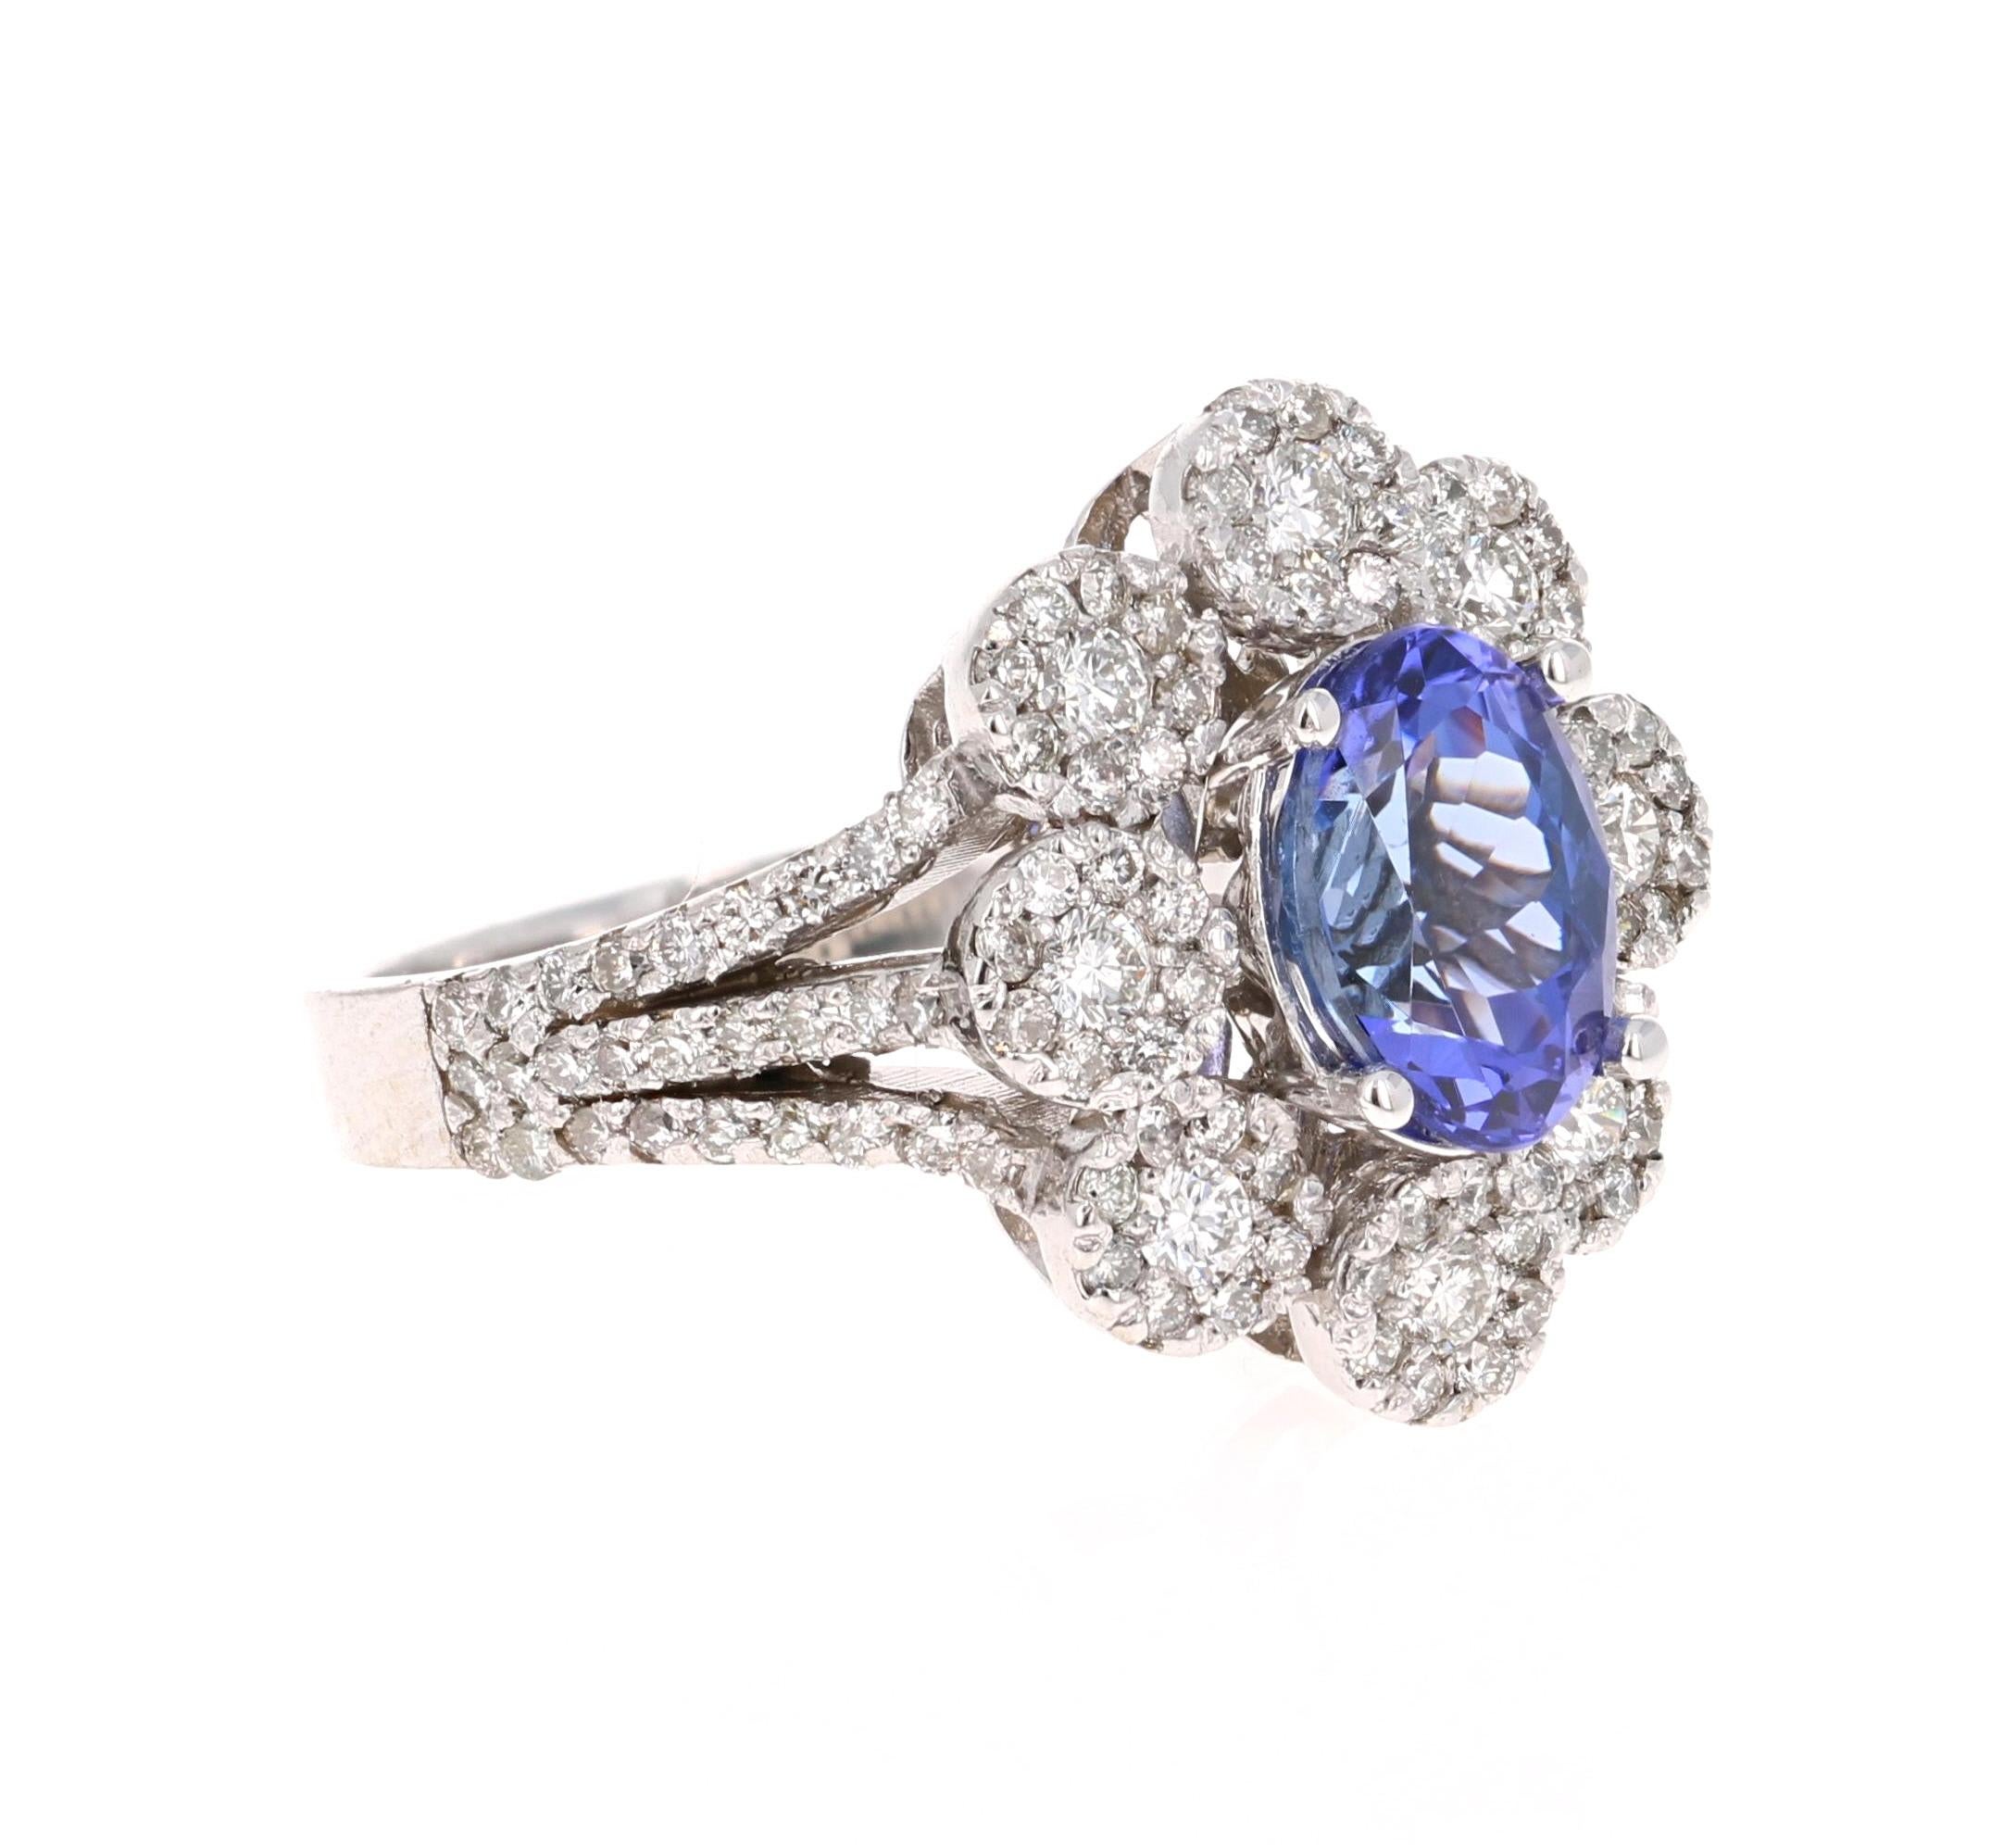 Elegant & Classic Tanzanite & Diamond Ring! 

This ring has a radiant bluish-purple Oval Cut Tanzanite weighing 1.98 Carats. It is surrounded by 126 Round Cut Diamonds that weigh 1.00 Carats. The total carat weight of the ring is 2.98 Carats. 